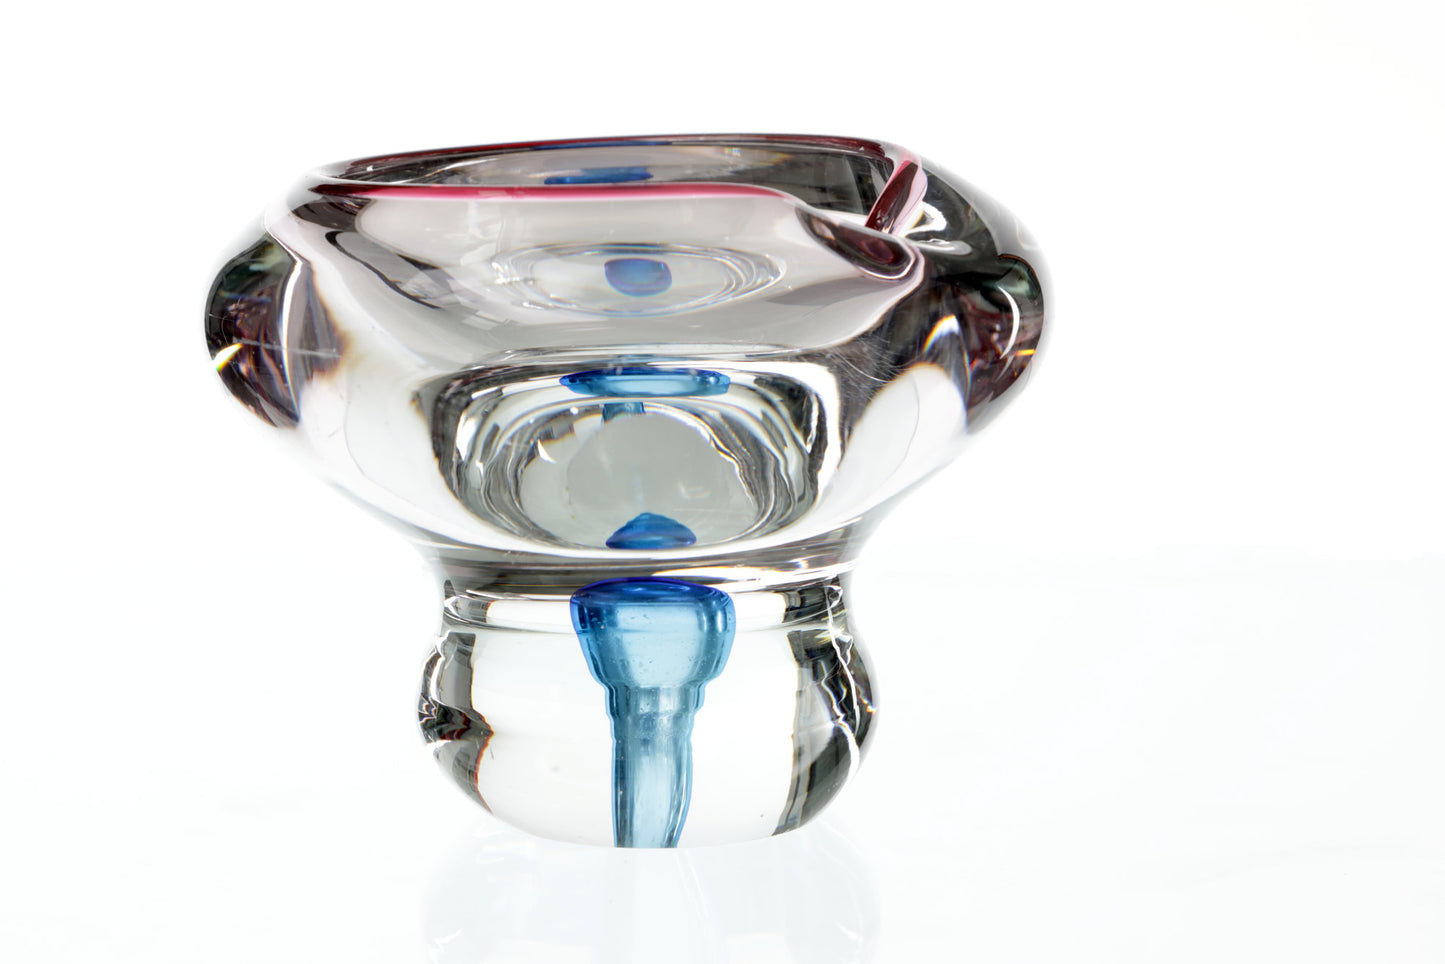 Murano glass ashtray from the 70s